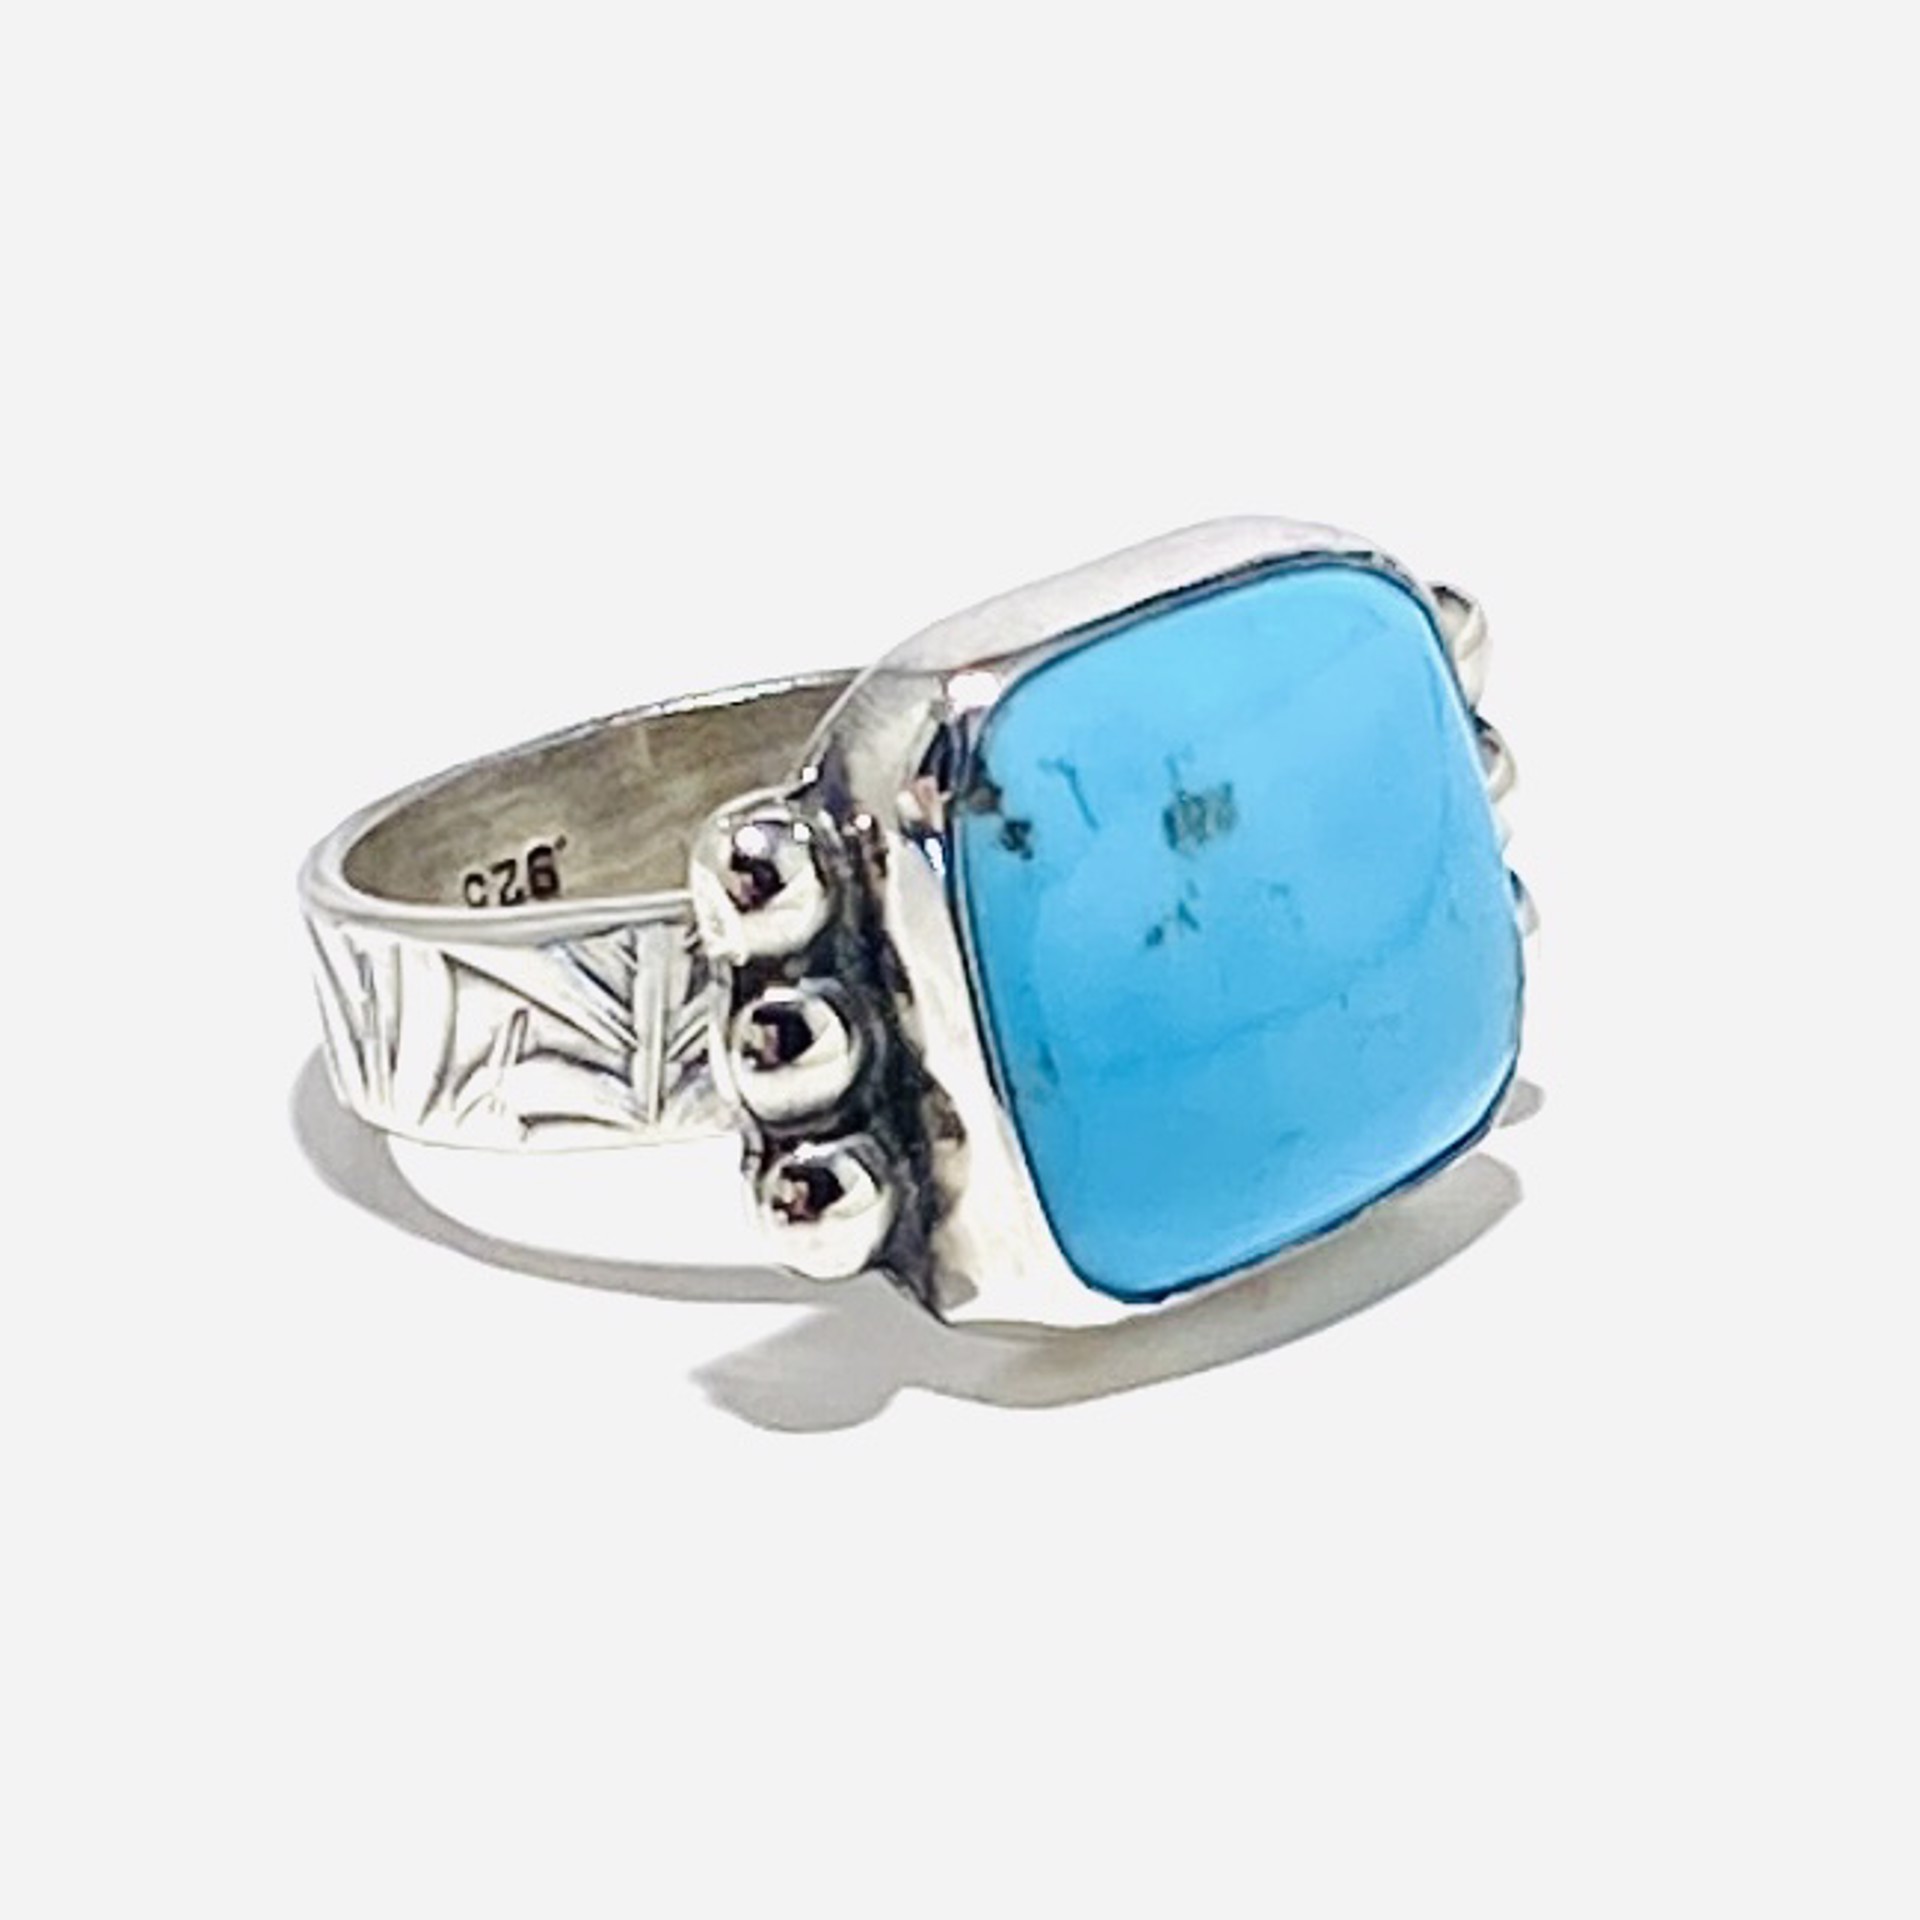 Square Campo Frio Turquoise Inlay Six Bead Accent Ring sz8.5 AB23-9 by Anne Bivens